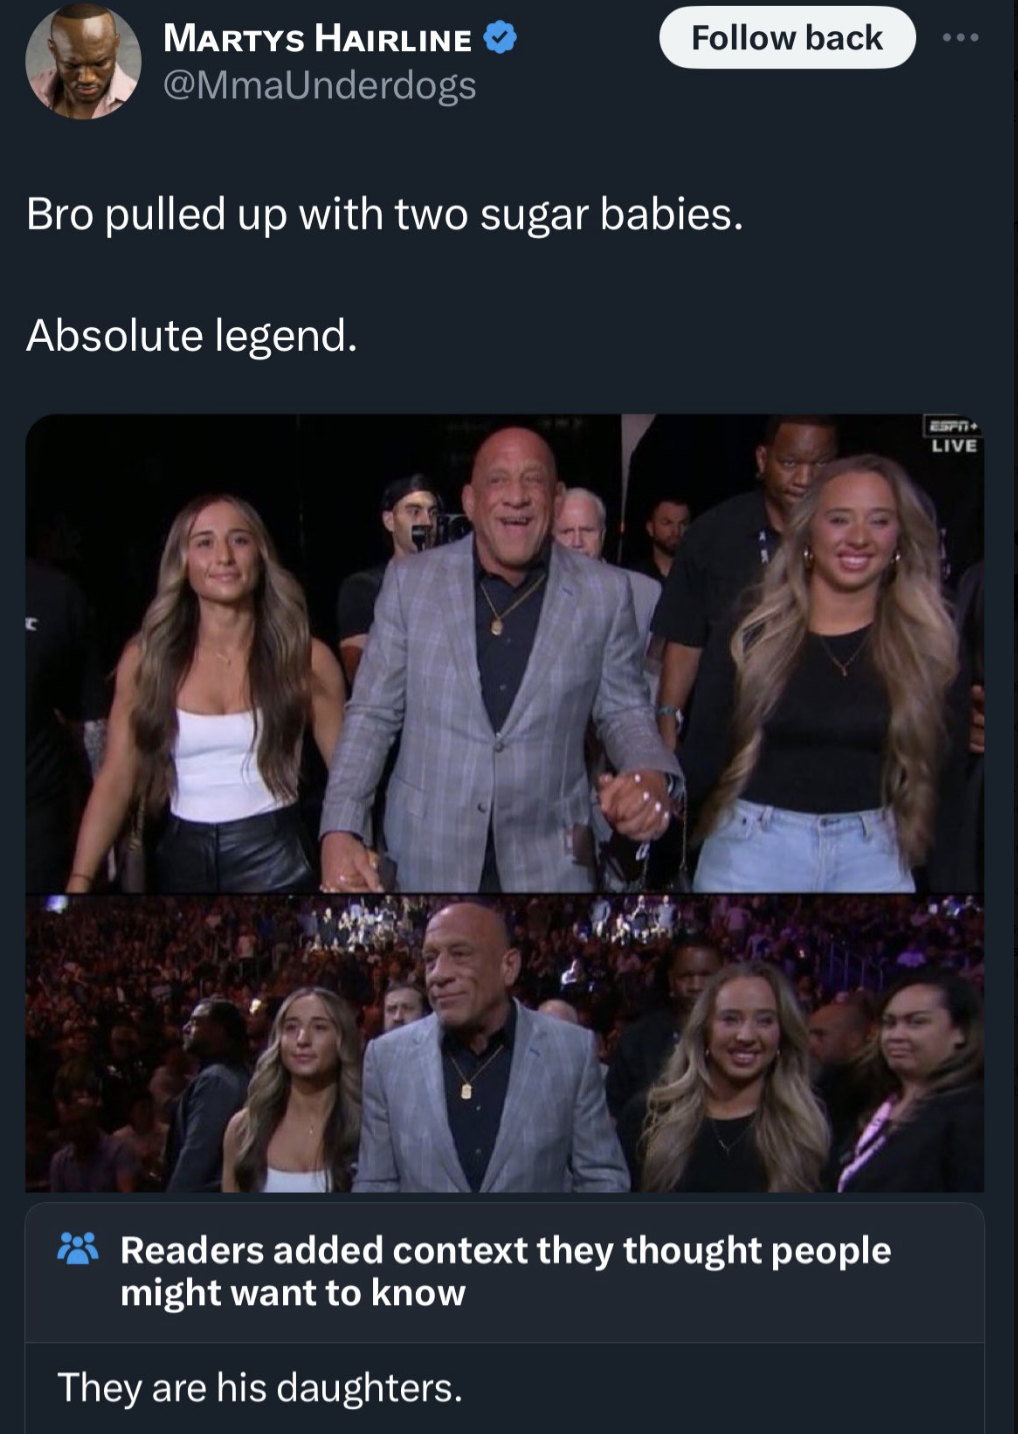 UFC 300 - Martys Hairline back Bro pulled up with two sugar babies. Absolute legend. Readers added context they thought people might want to know They are his daughters. Live